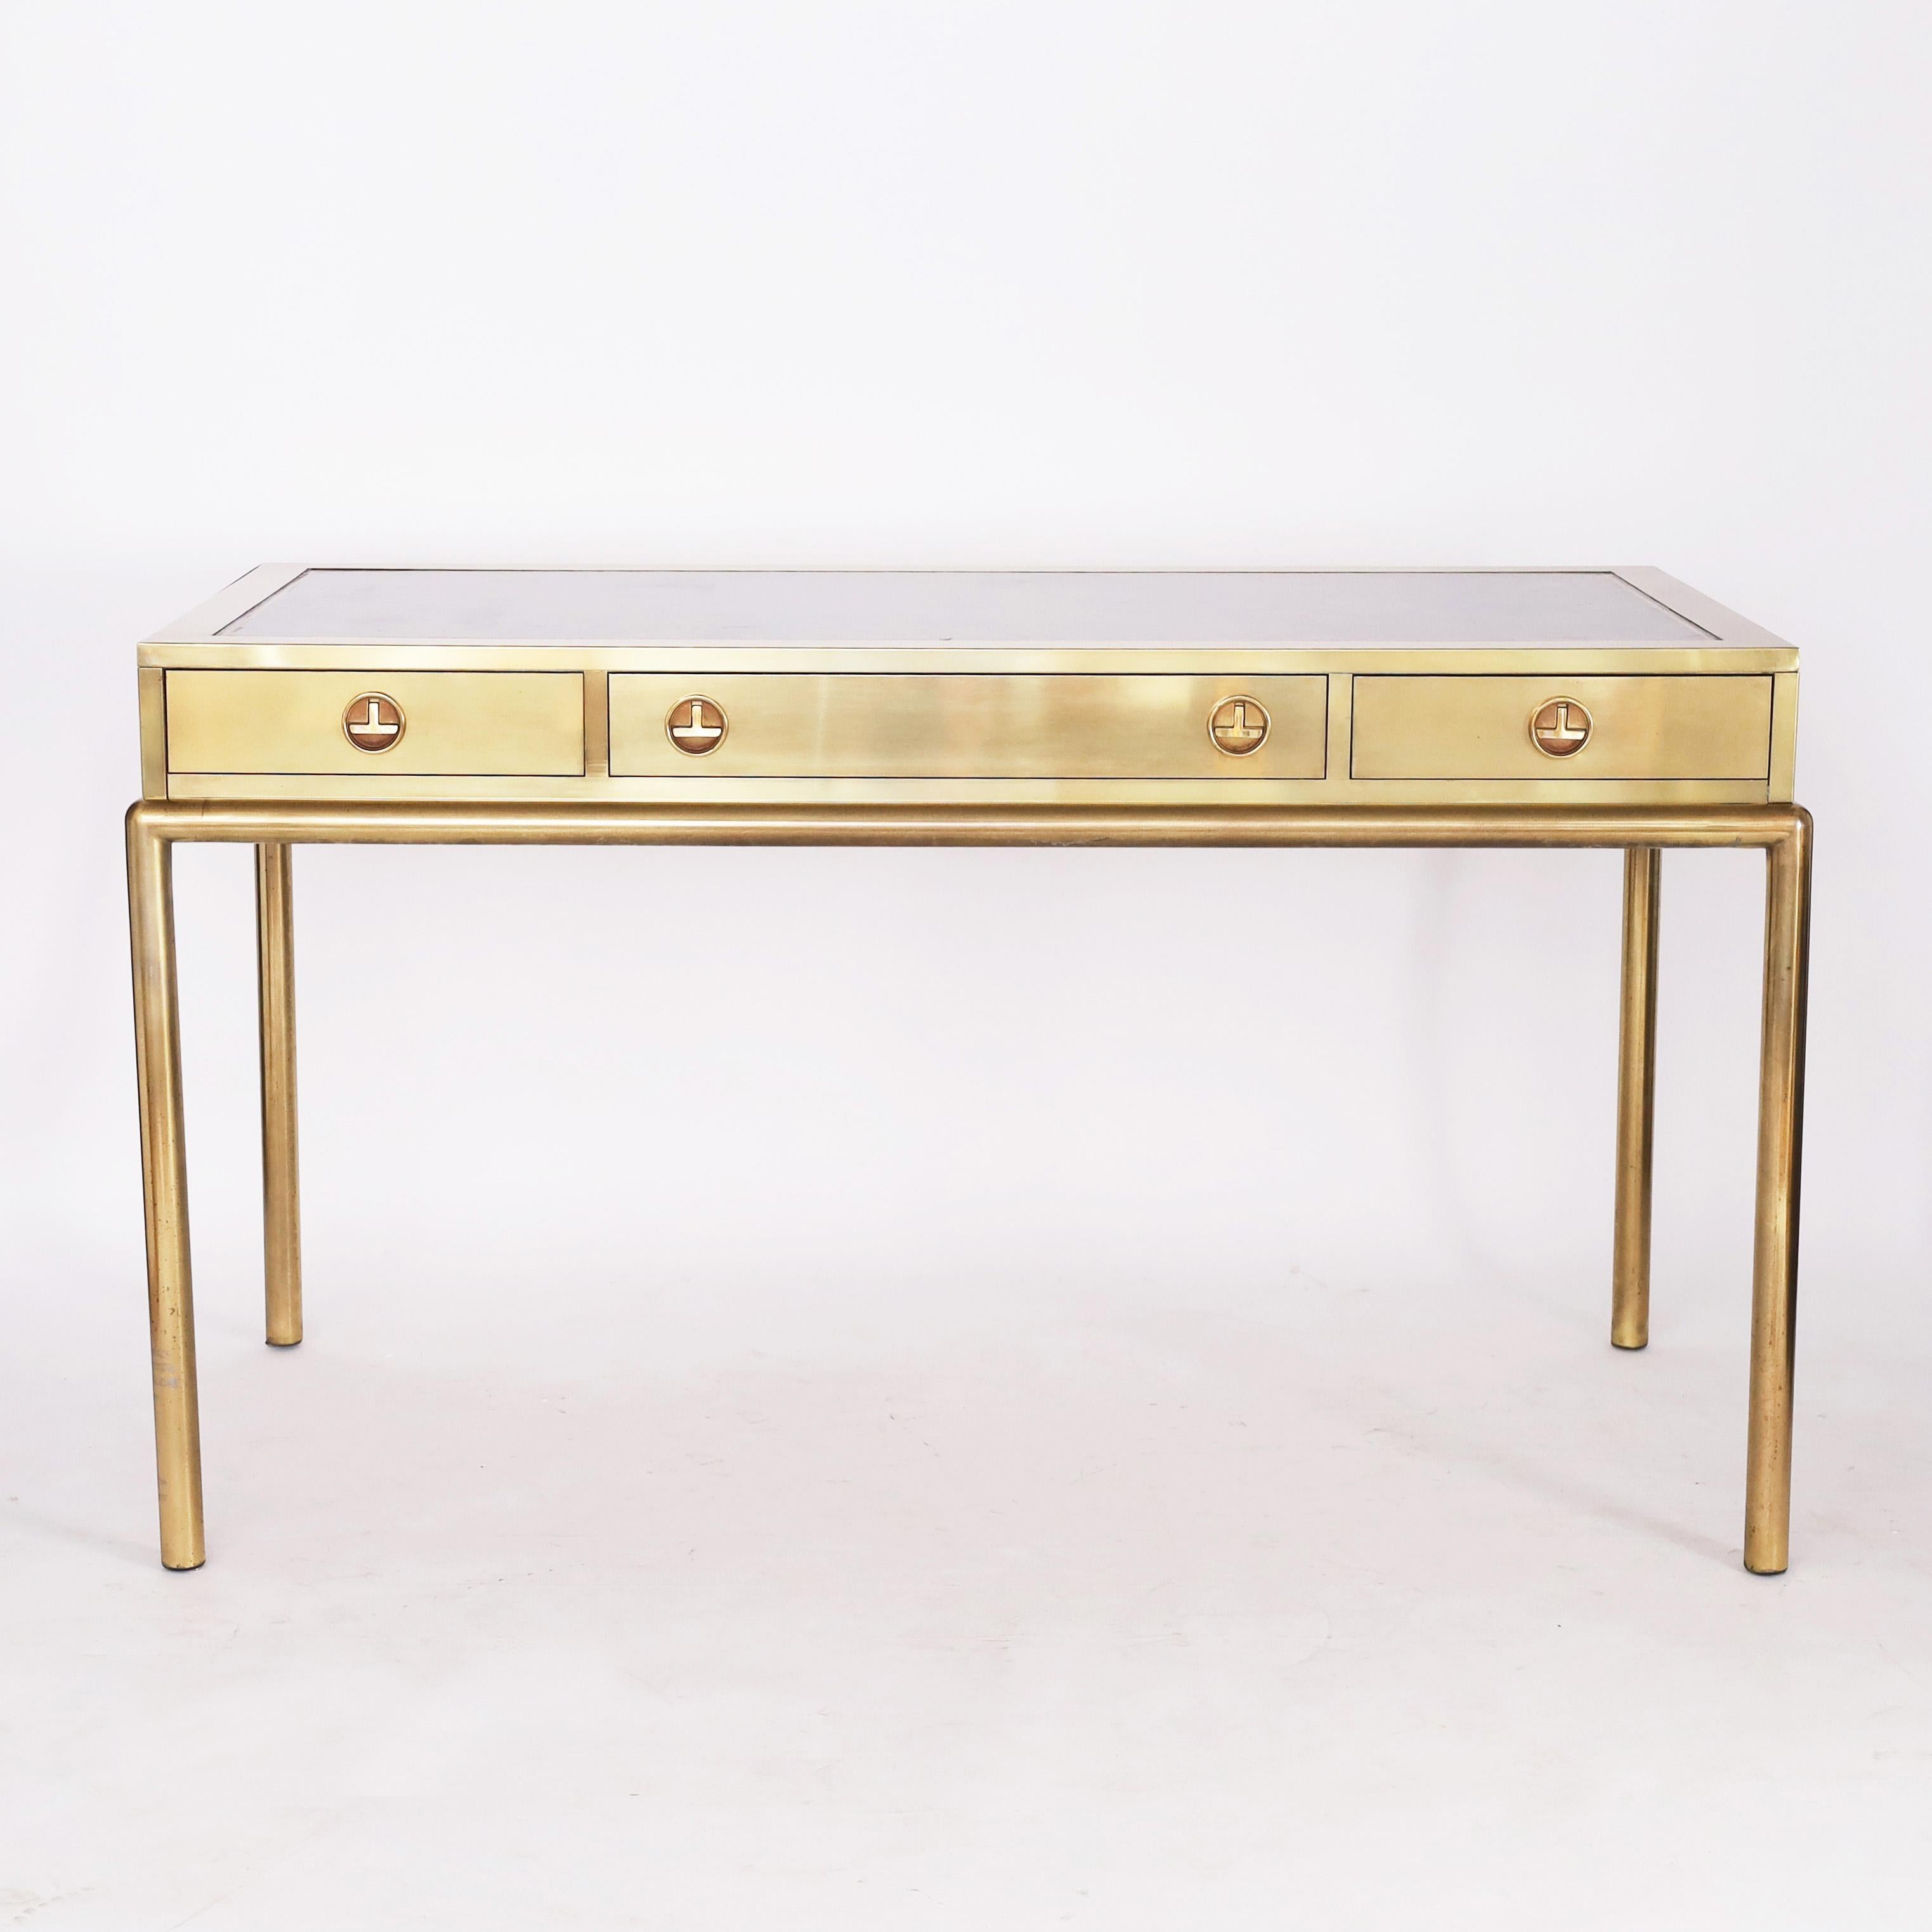 Impressive vintage Mastercraft writing desk crafted in brass, in a sleek chinoiserie stylized form, with a unique acid washed finish, having a tooled leather top on a case with three drawers with modernized campaign hardware over elegant tubular